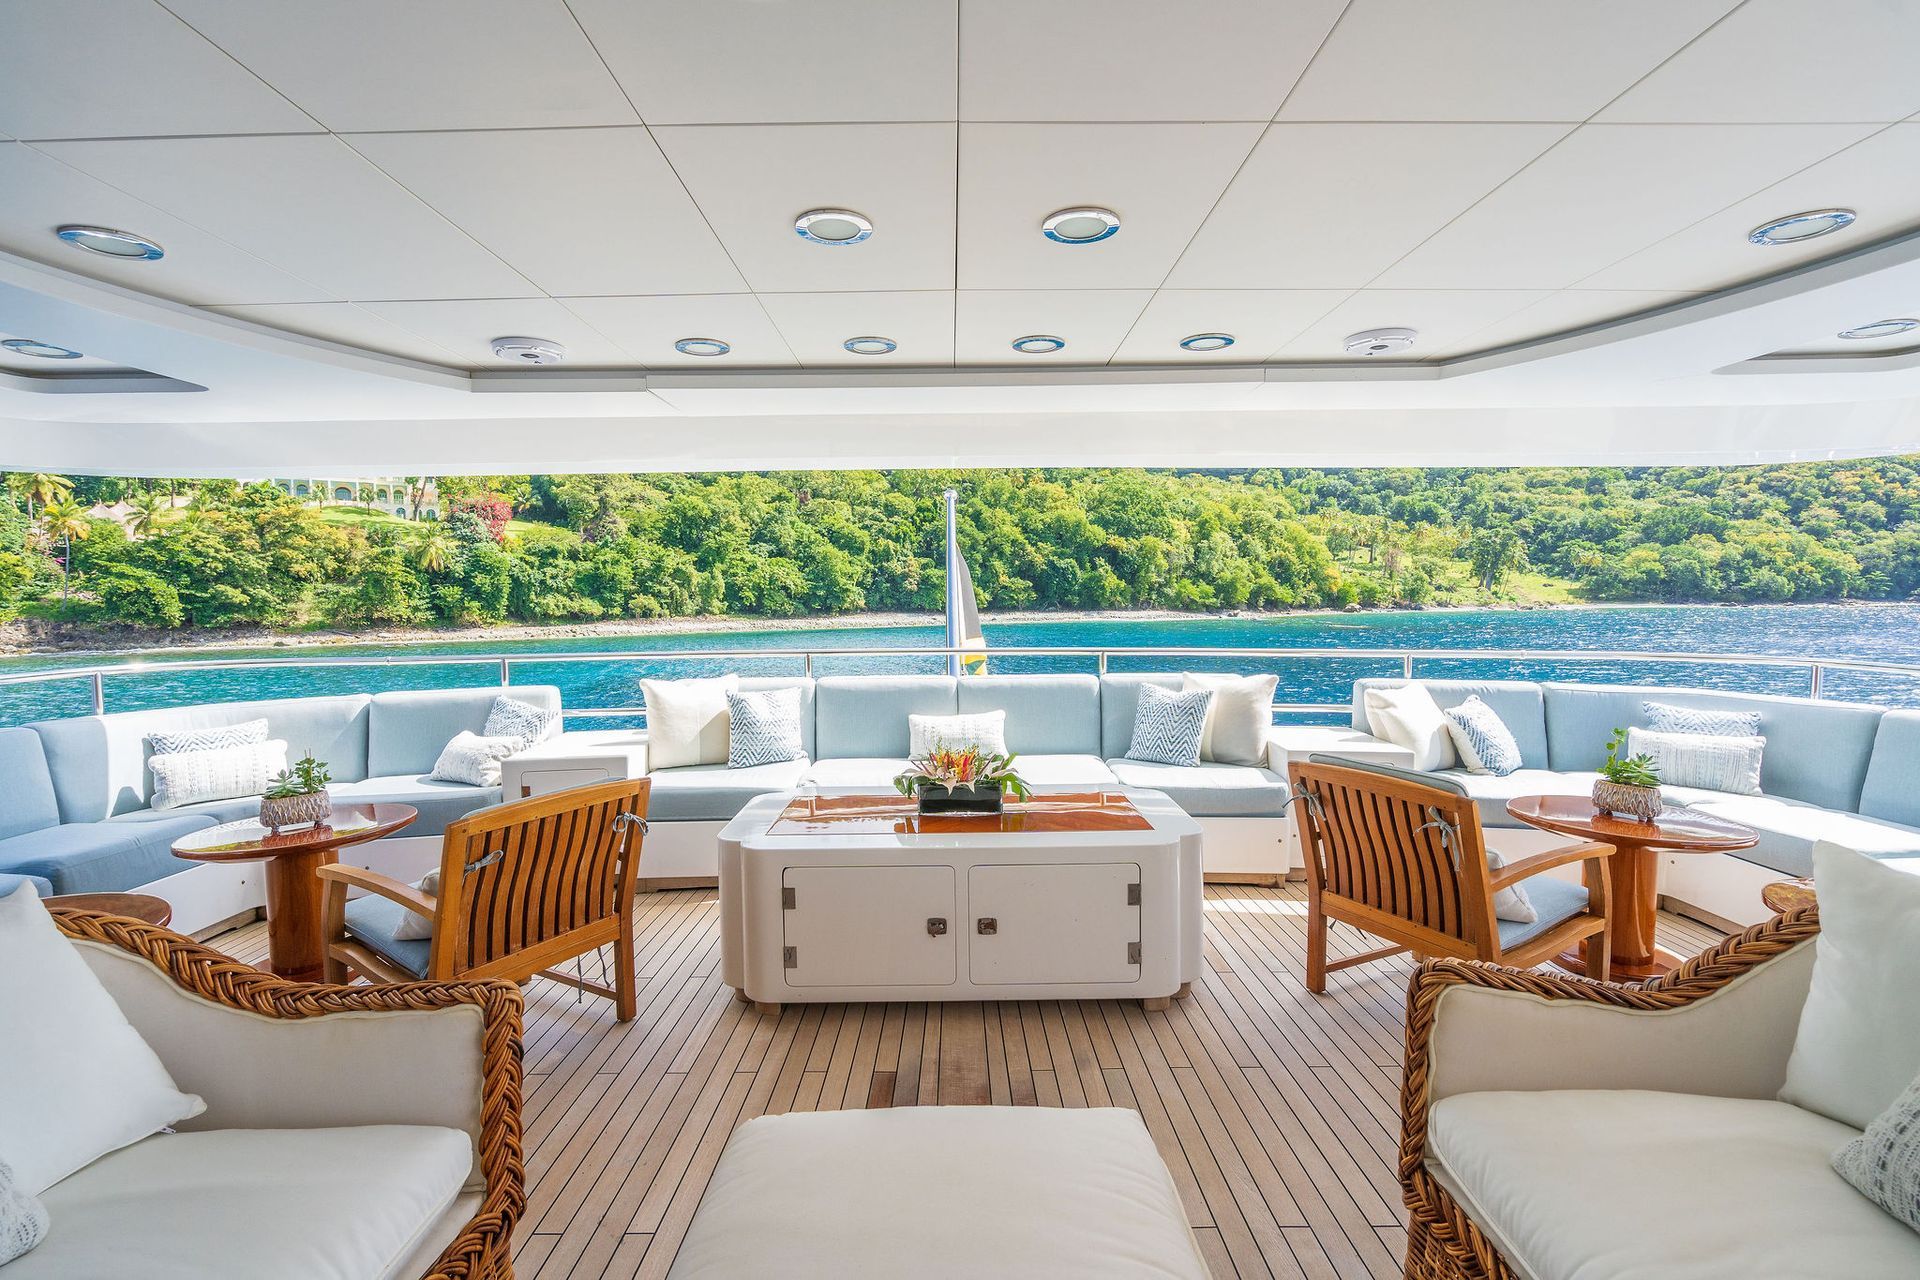 there are a lot of chairs and tables on the deck of a yacht